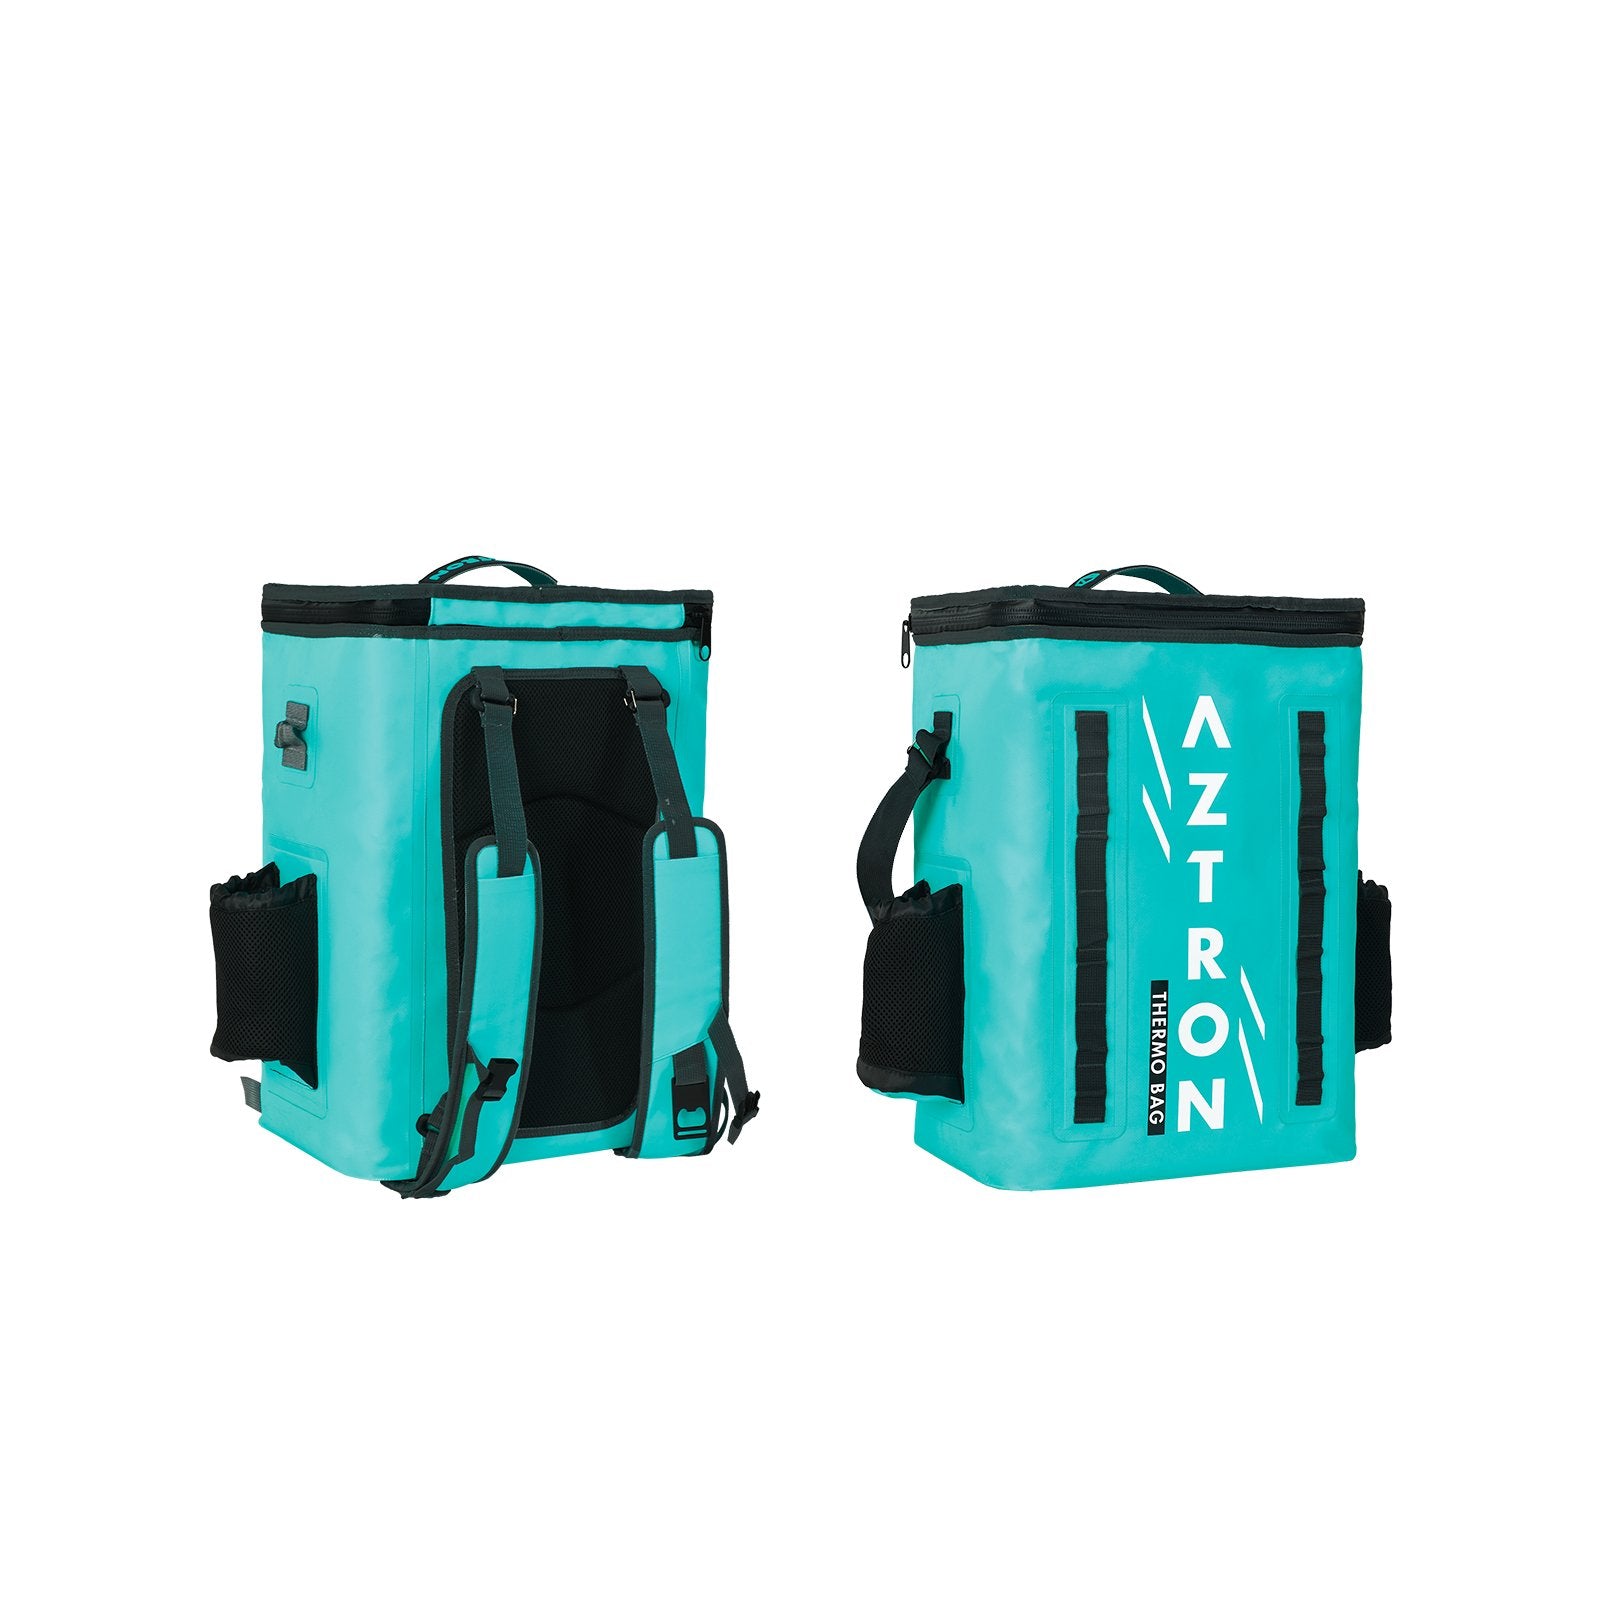 Aztron Thermo Cooler Bag - Worthing Watersports - Dry Bags - Aztron